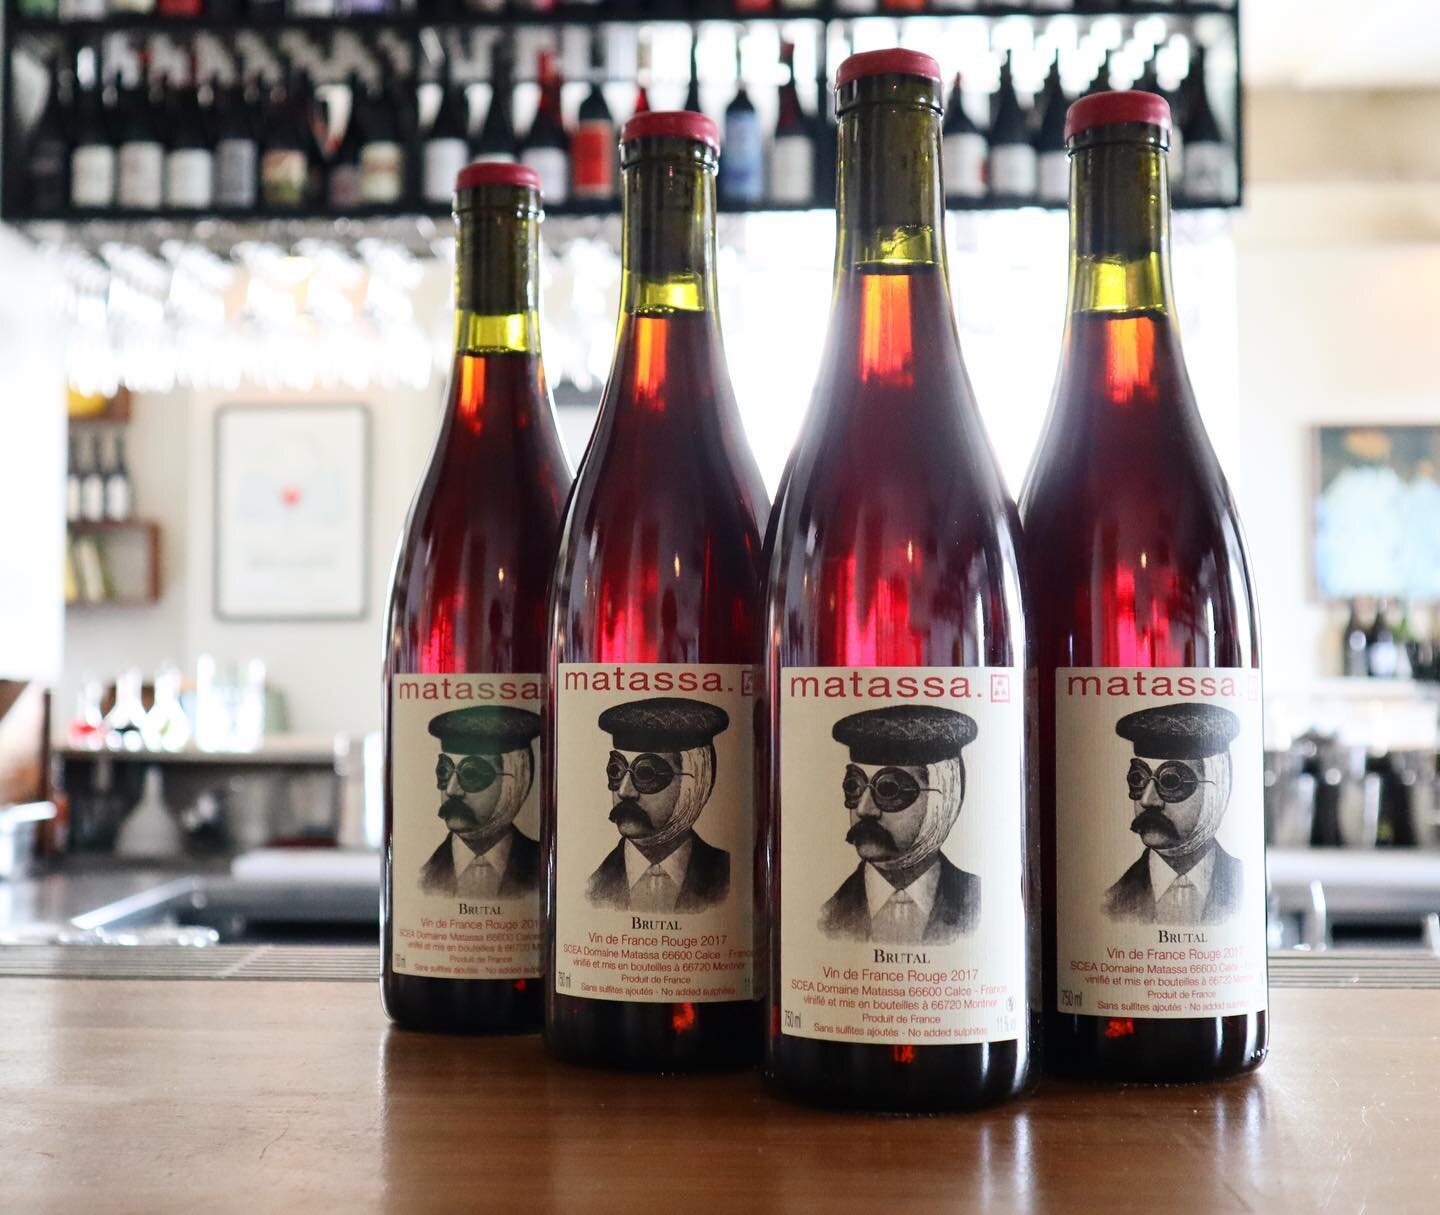 Spring Wines 👑

We&rsquo;ve been selling too much good wine lately and being out of stock is boring, so there&rsquo;s a bunch of brilliant new bottles on the menu from the cellar today. 

Particularly excited about all the Canberra District gear in 